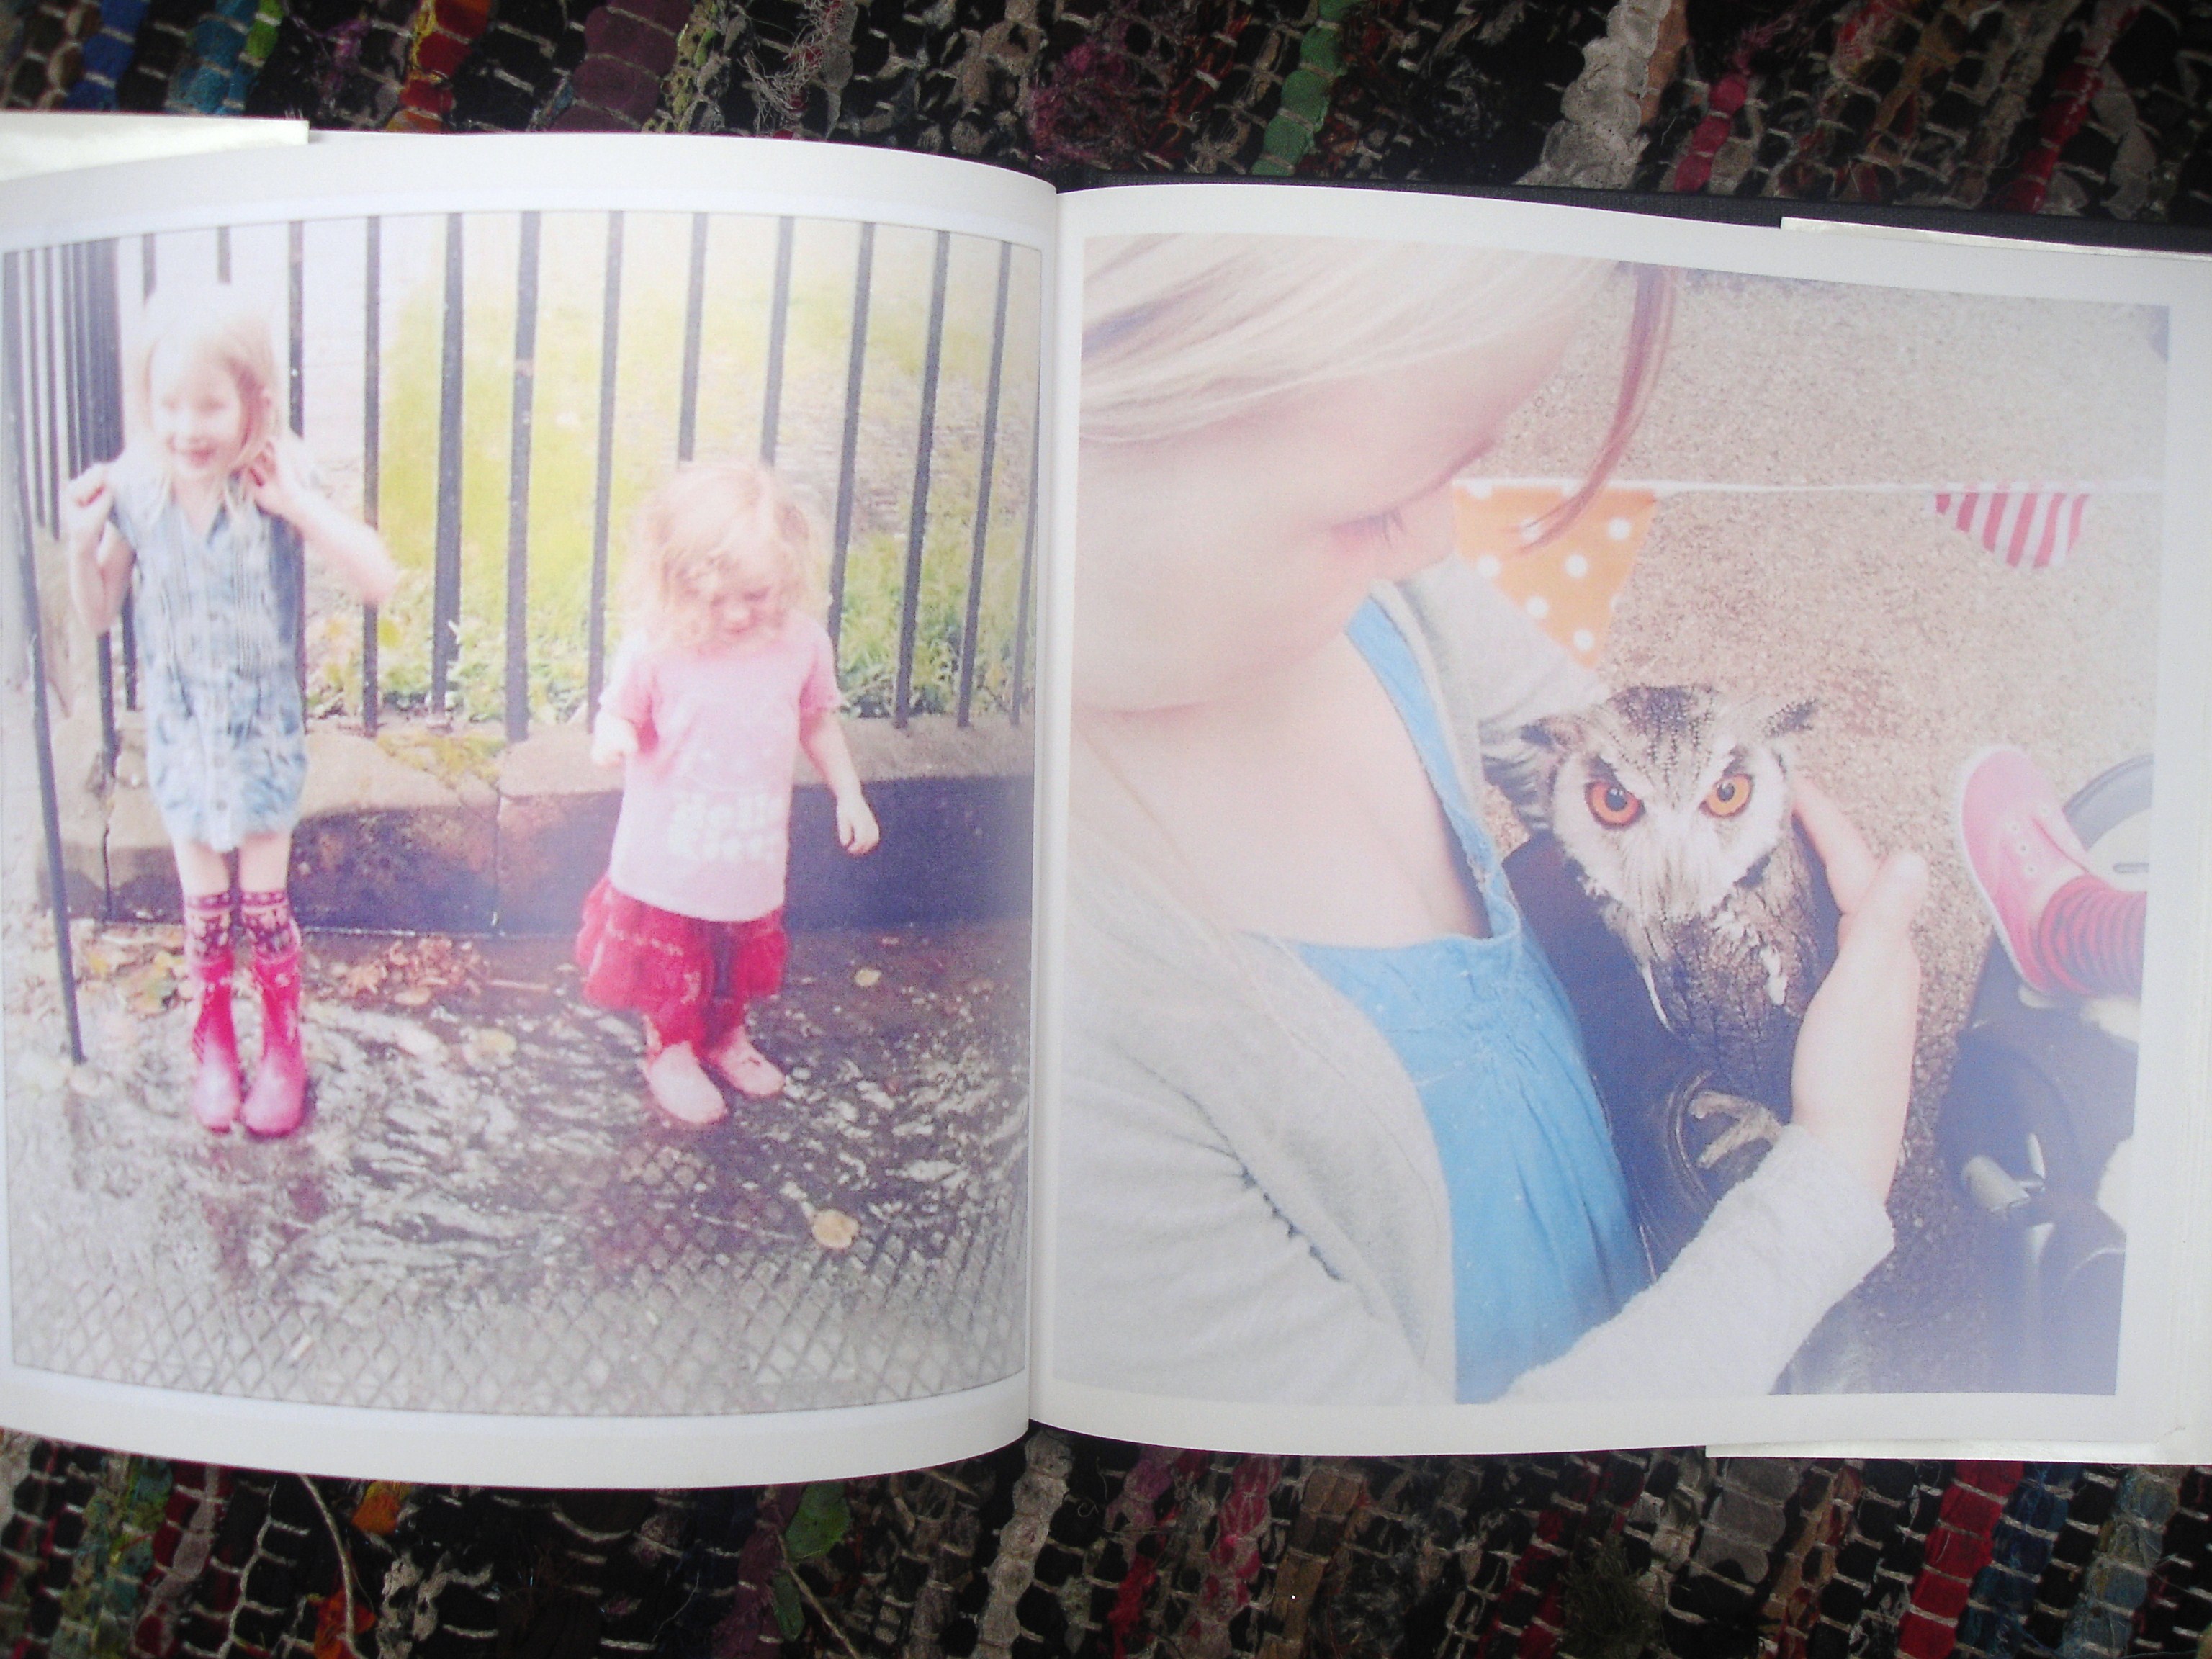 creating a book of favourite photos to save those memories